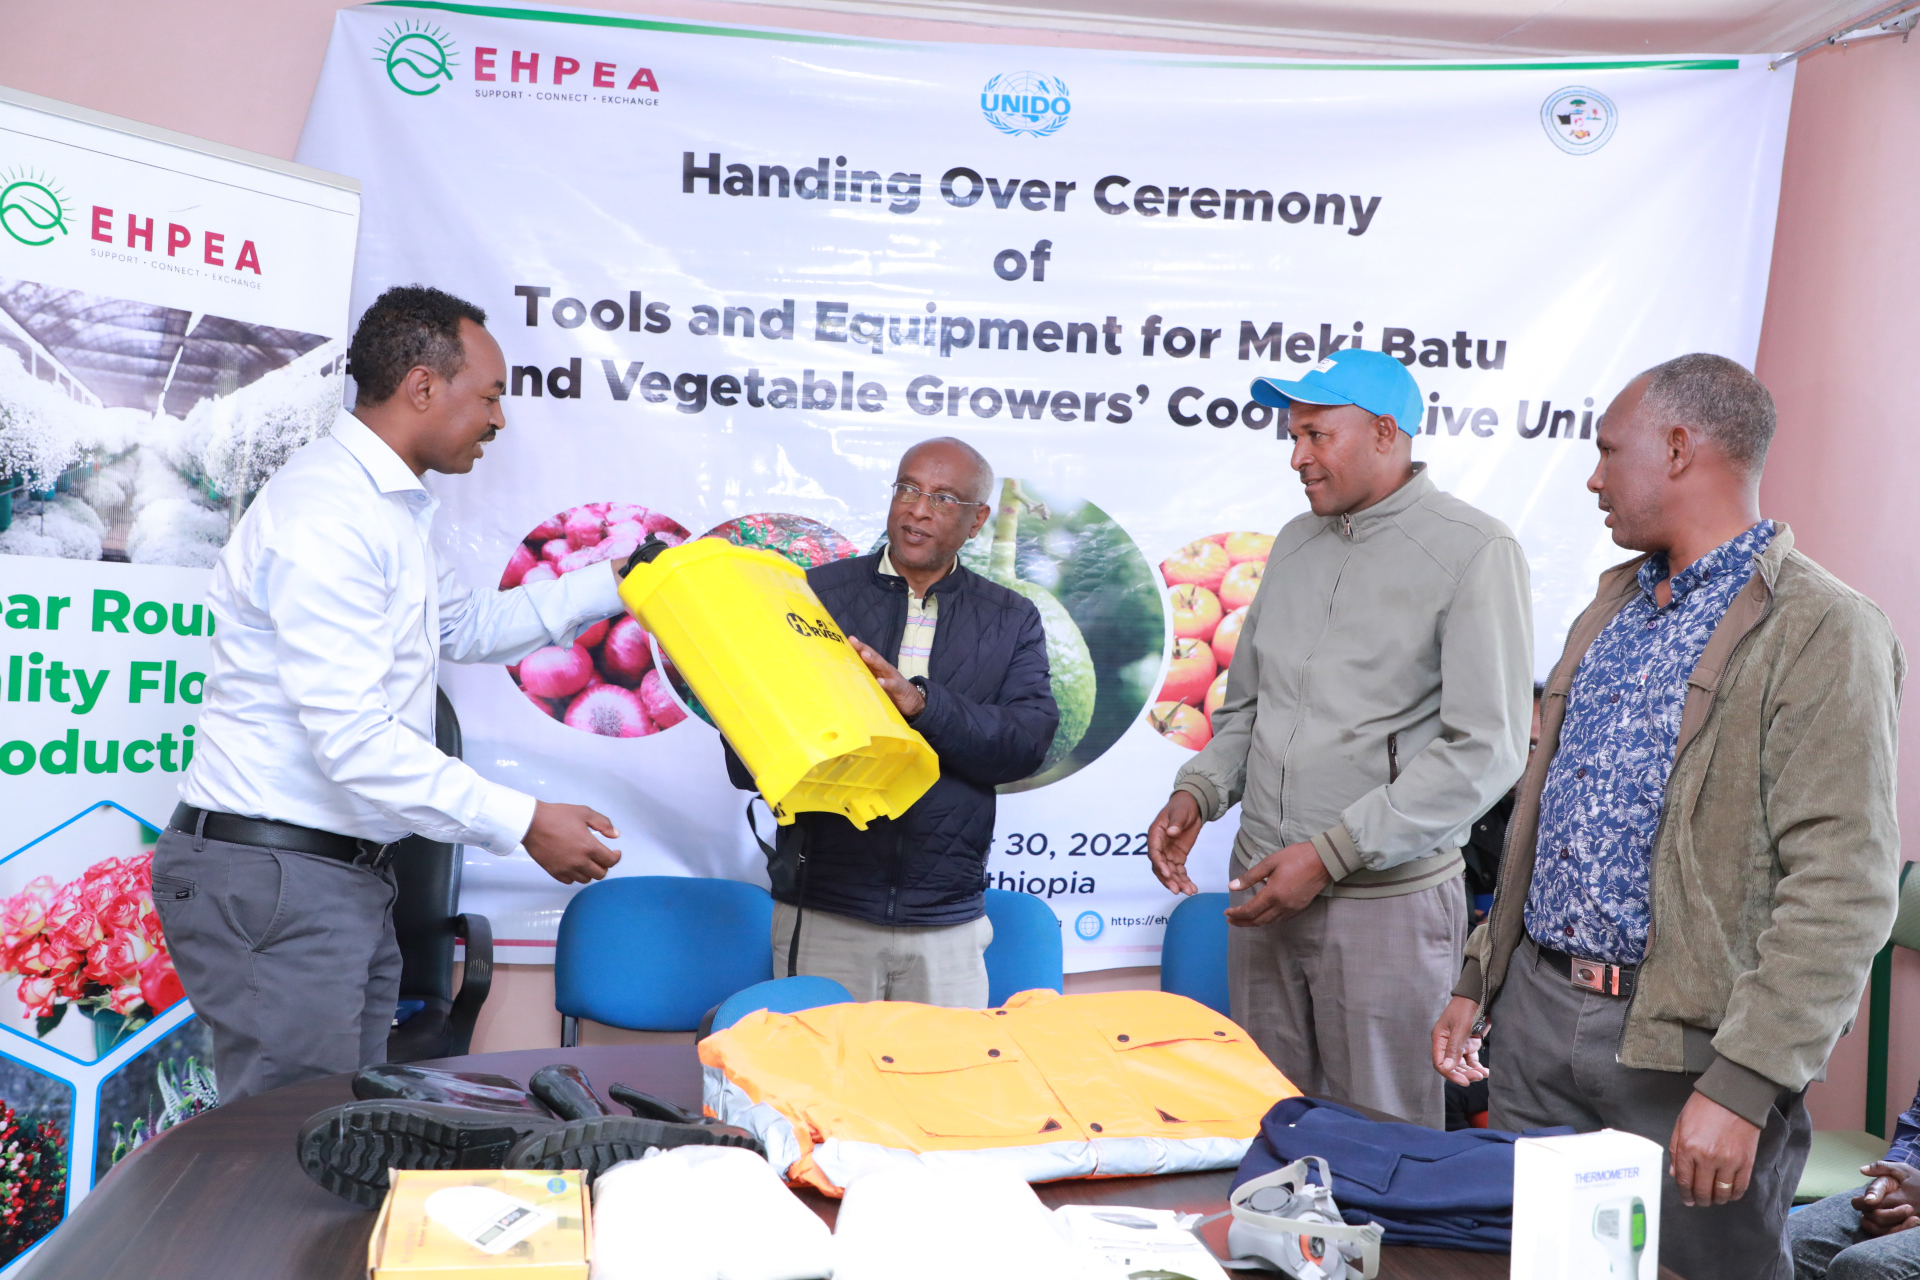 Supply of safety materials, tools and provision of training provided to Meki Batu Fruits and vegetables Growers’ Cooperative union